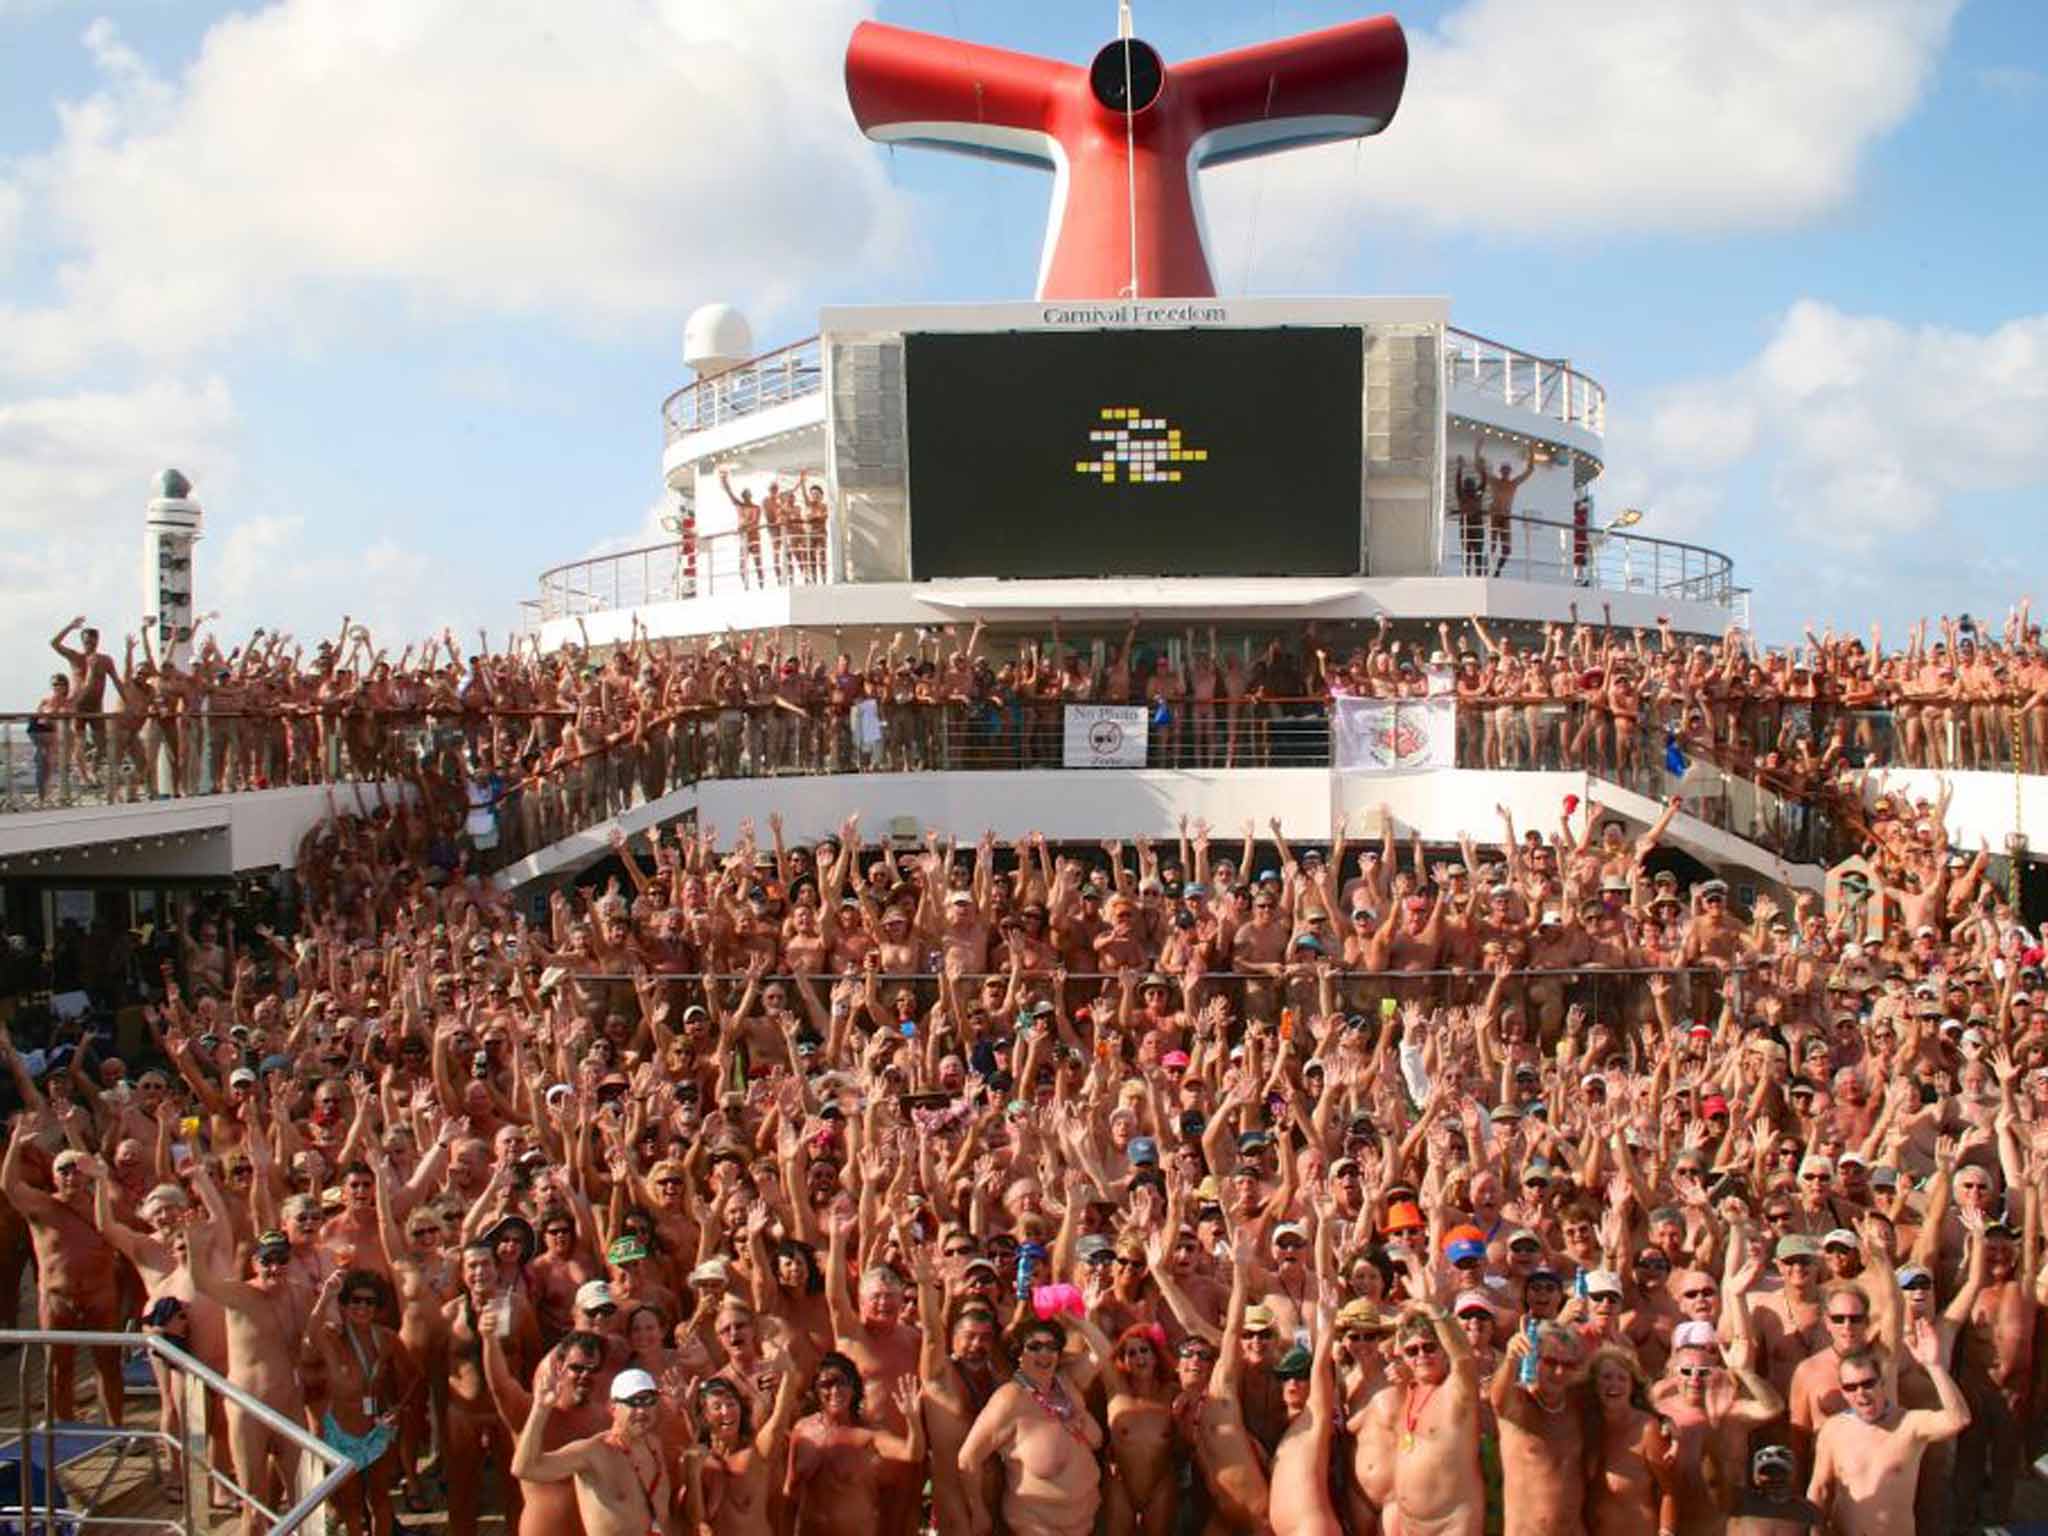 Nudist Cruise Ship Whats It Like On A Boat With 2000 People Not